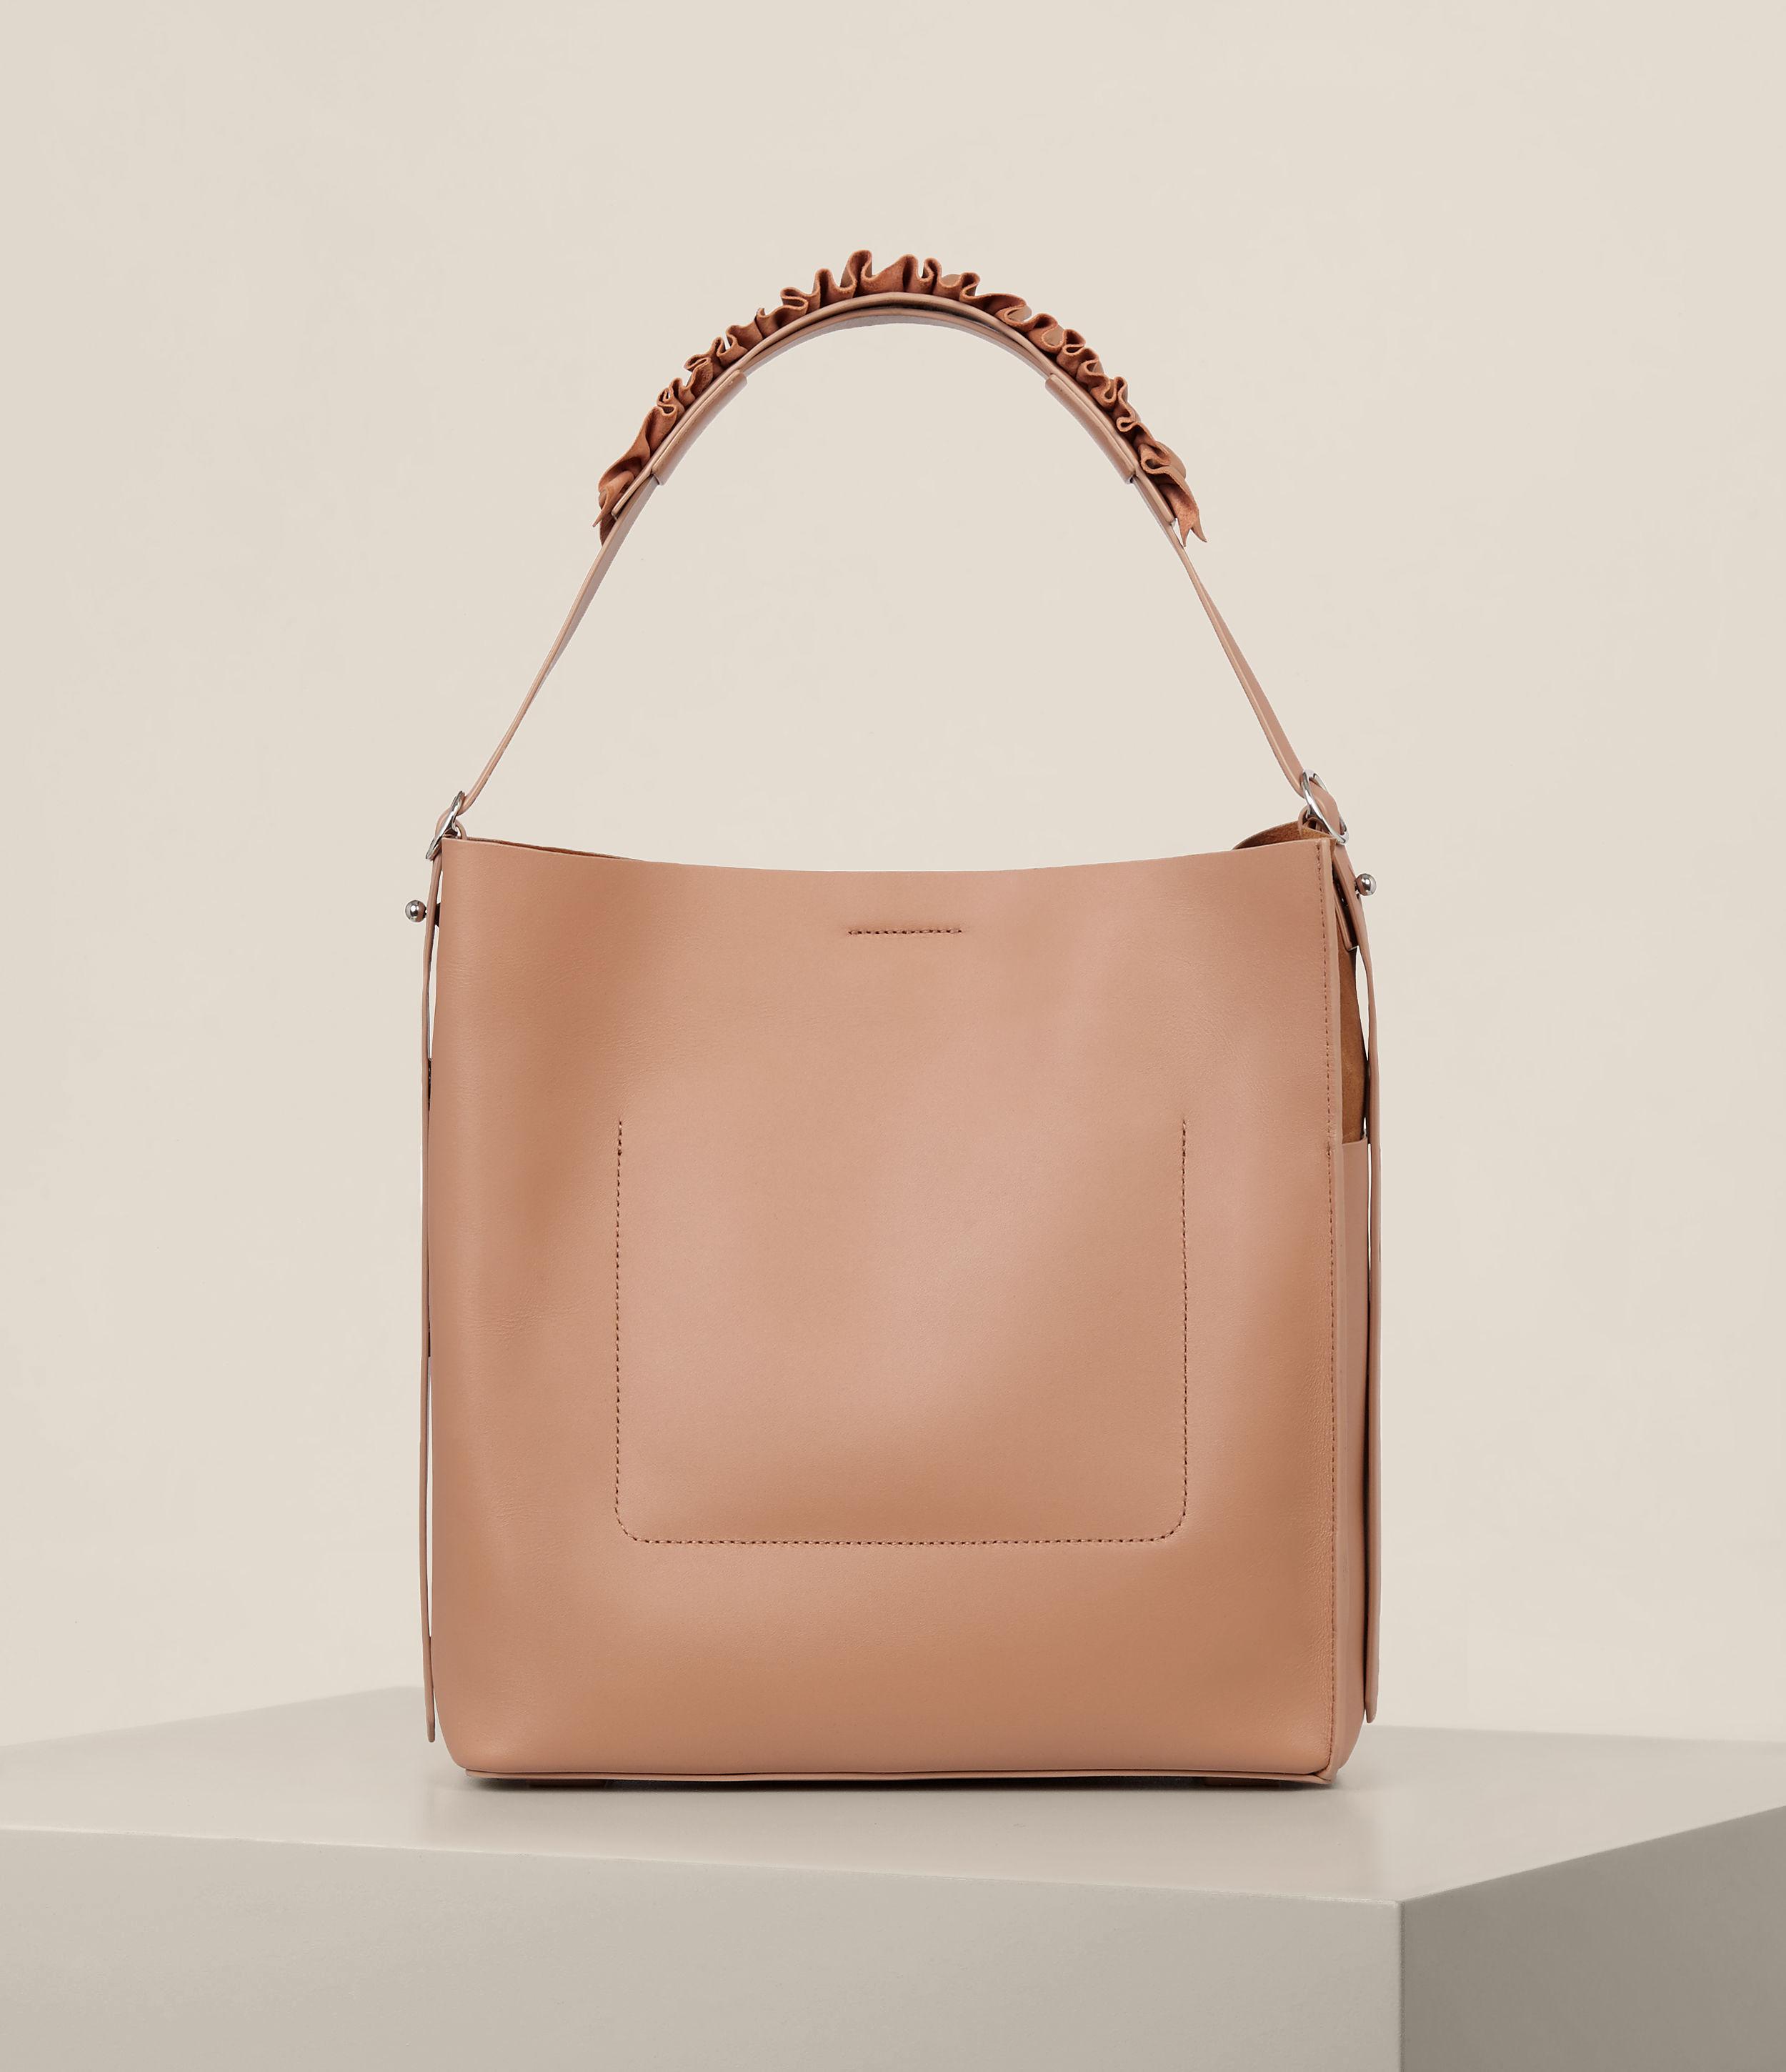 AllSaints Maya Leather Mini North South Tote in Light Caramel (Brown) - Lyst